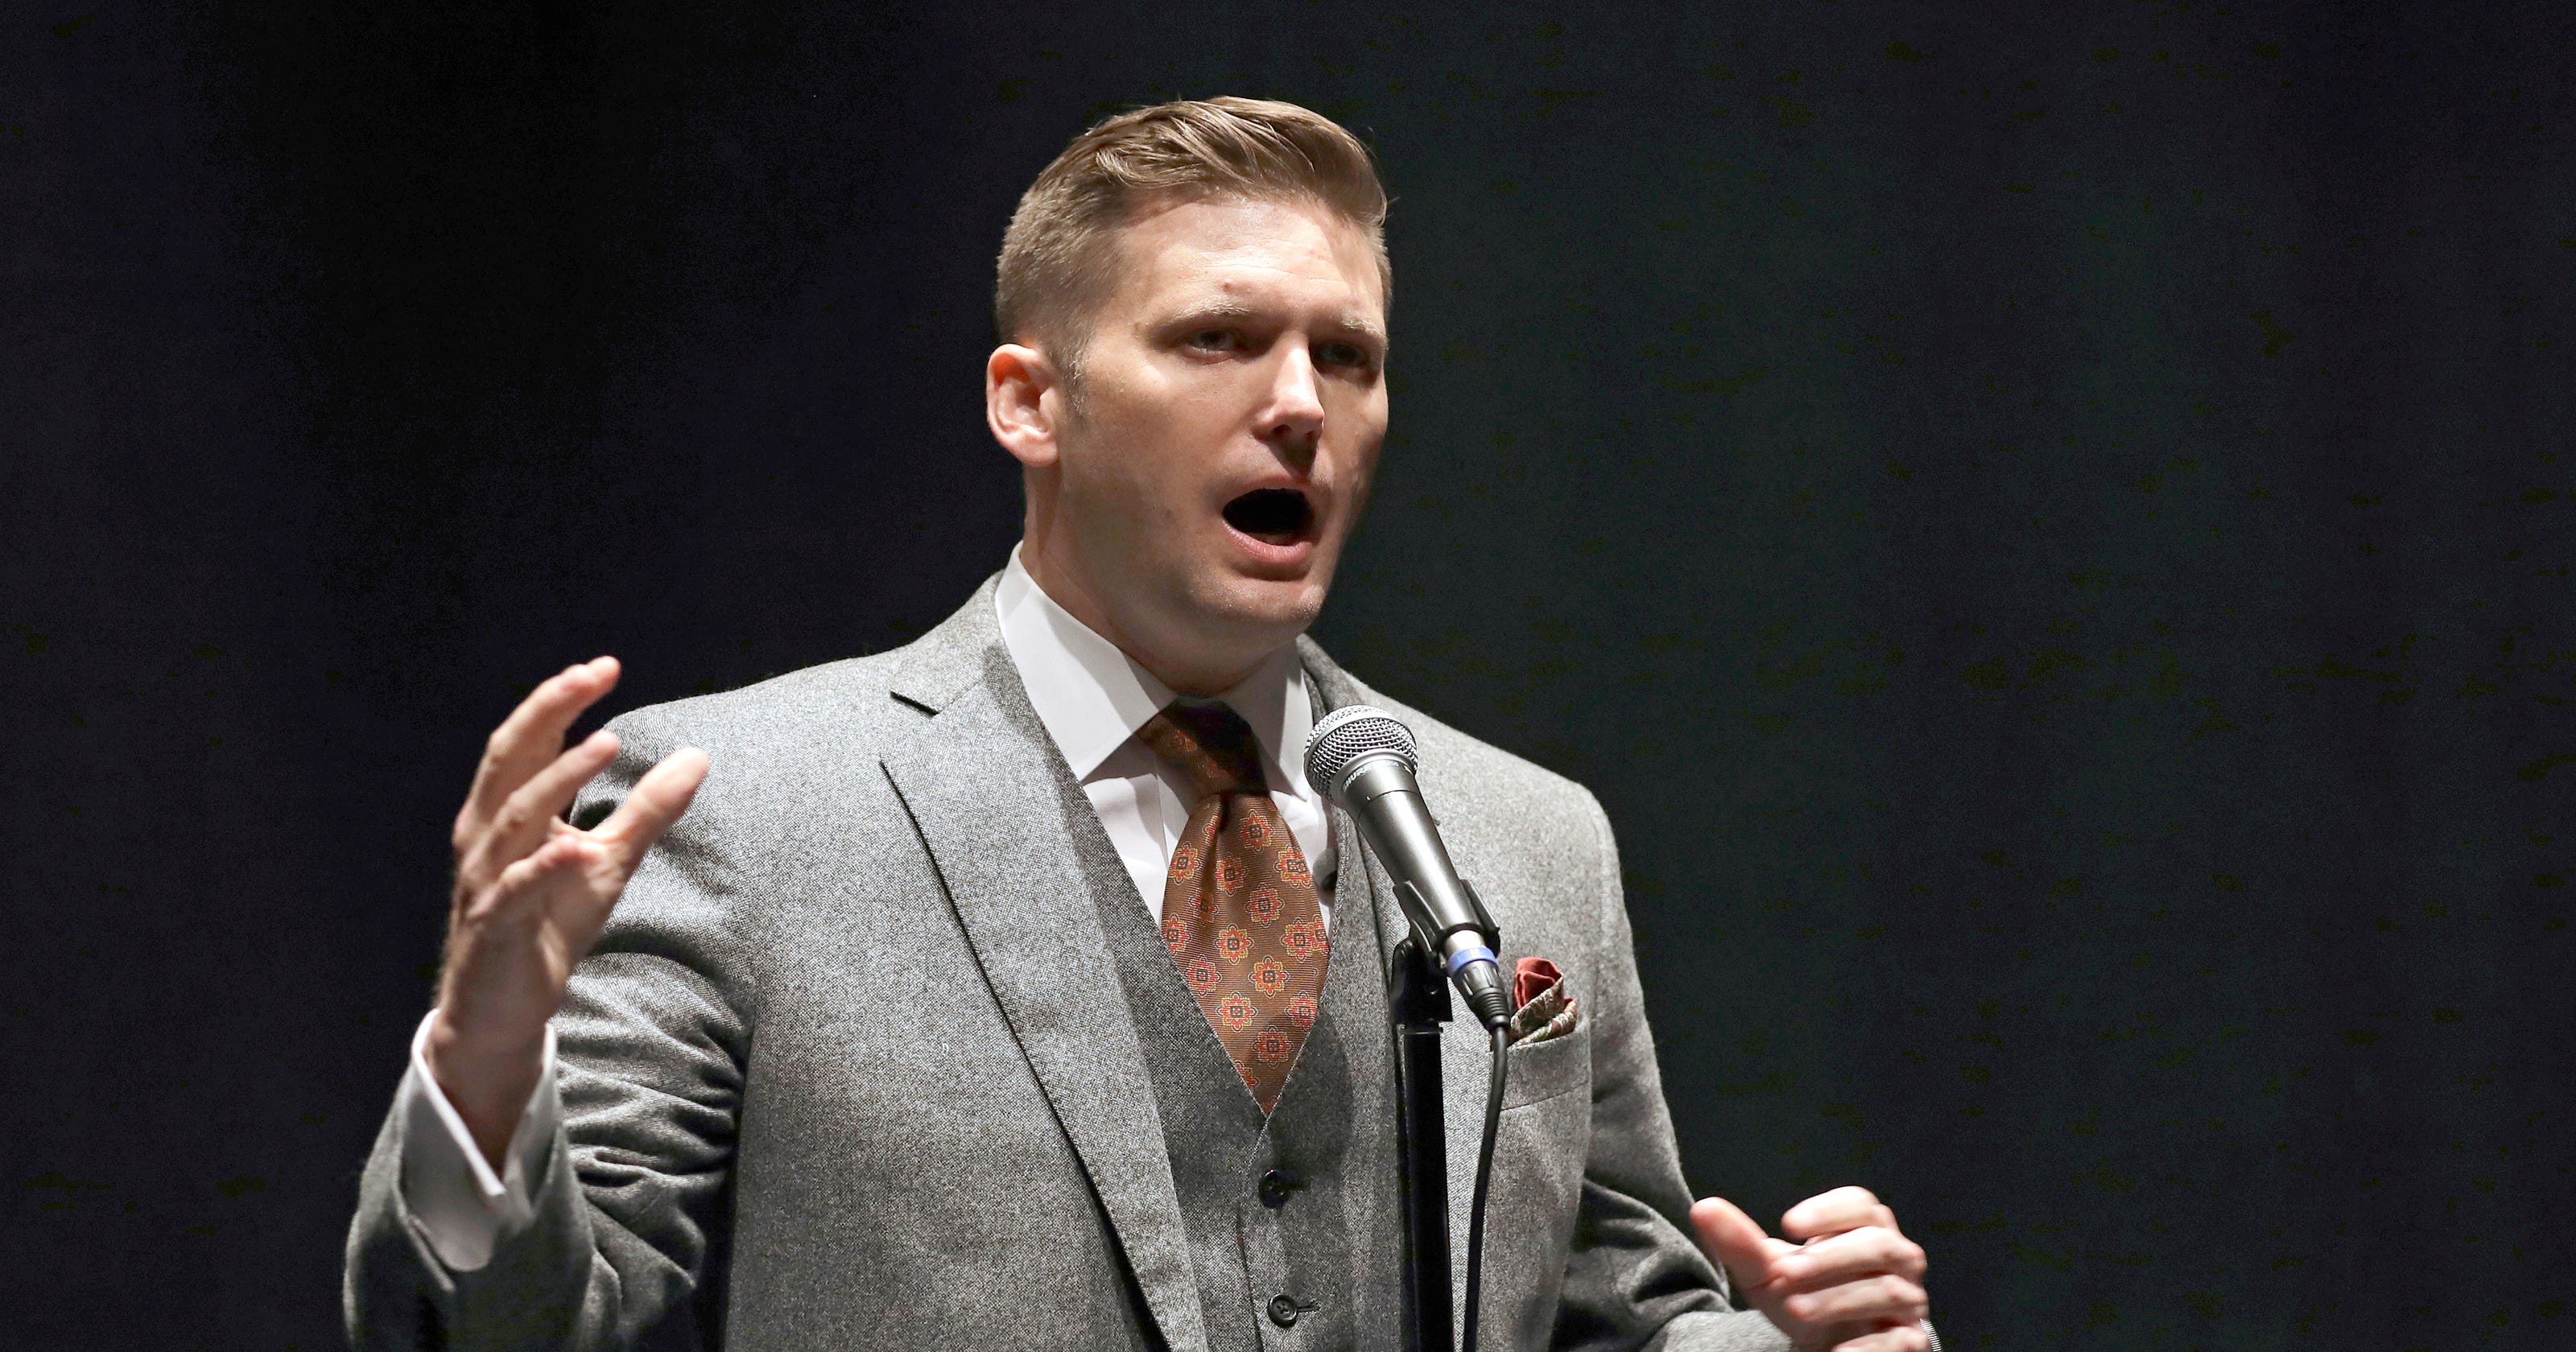 Trial date set for Richard Spencer suit against UC